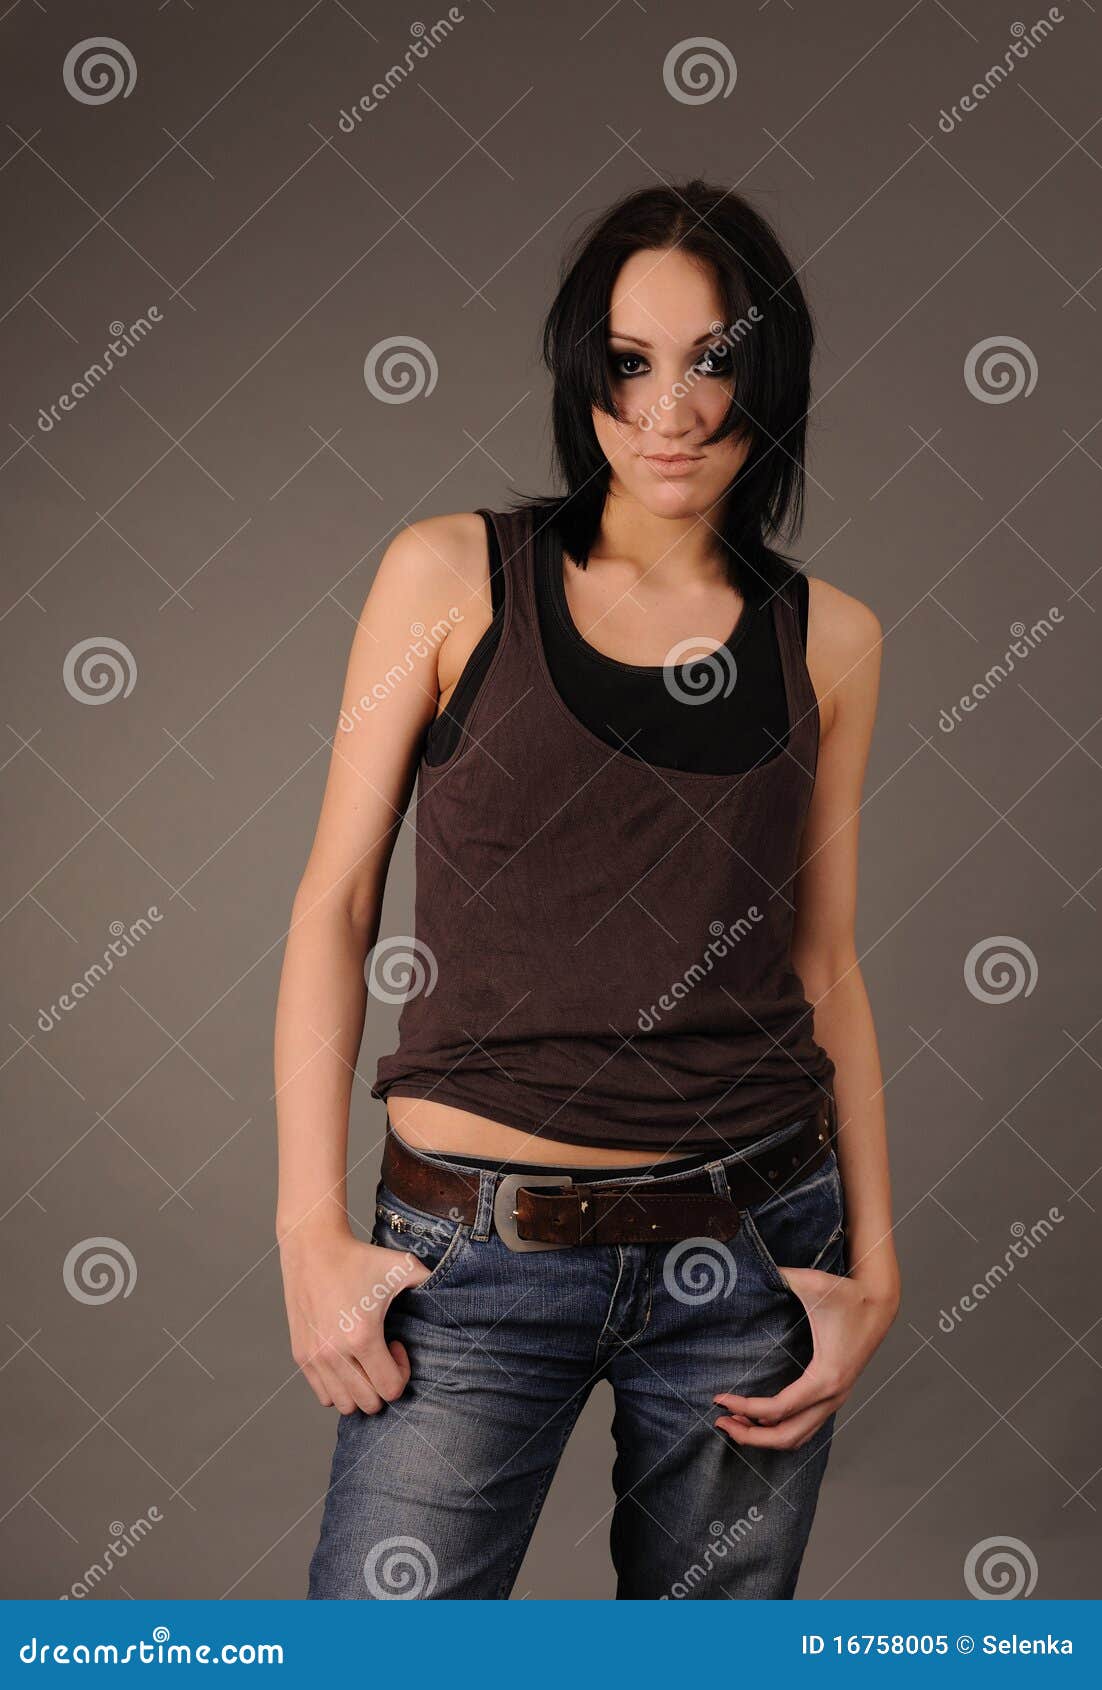 Girl in Rumpled Shirt and Jeans. Stock Image - Image of happy, person ...